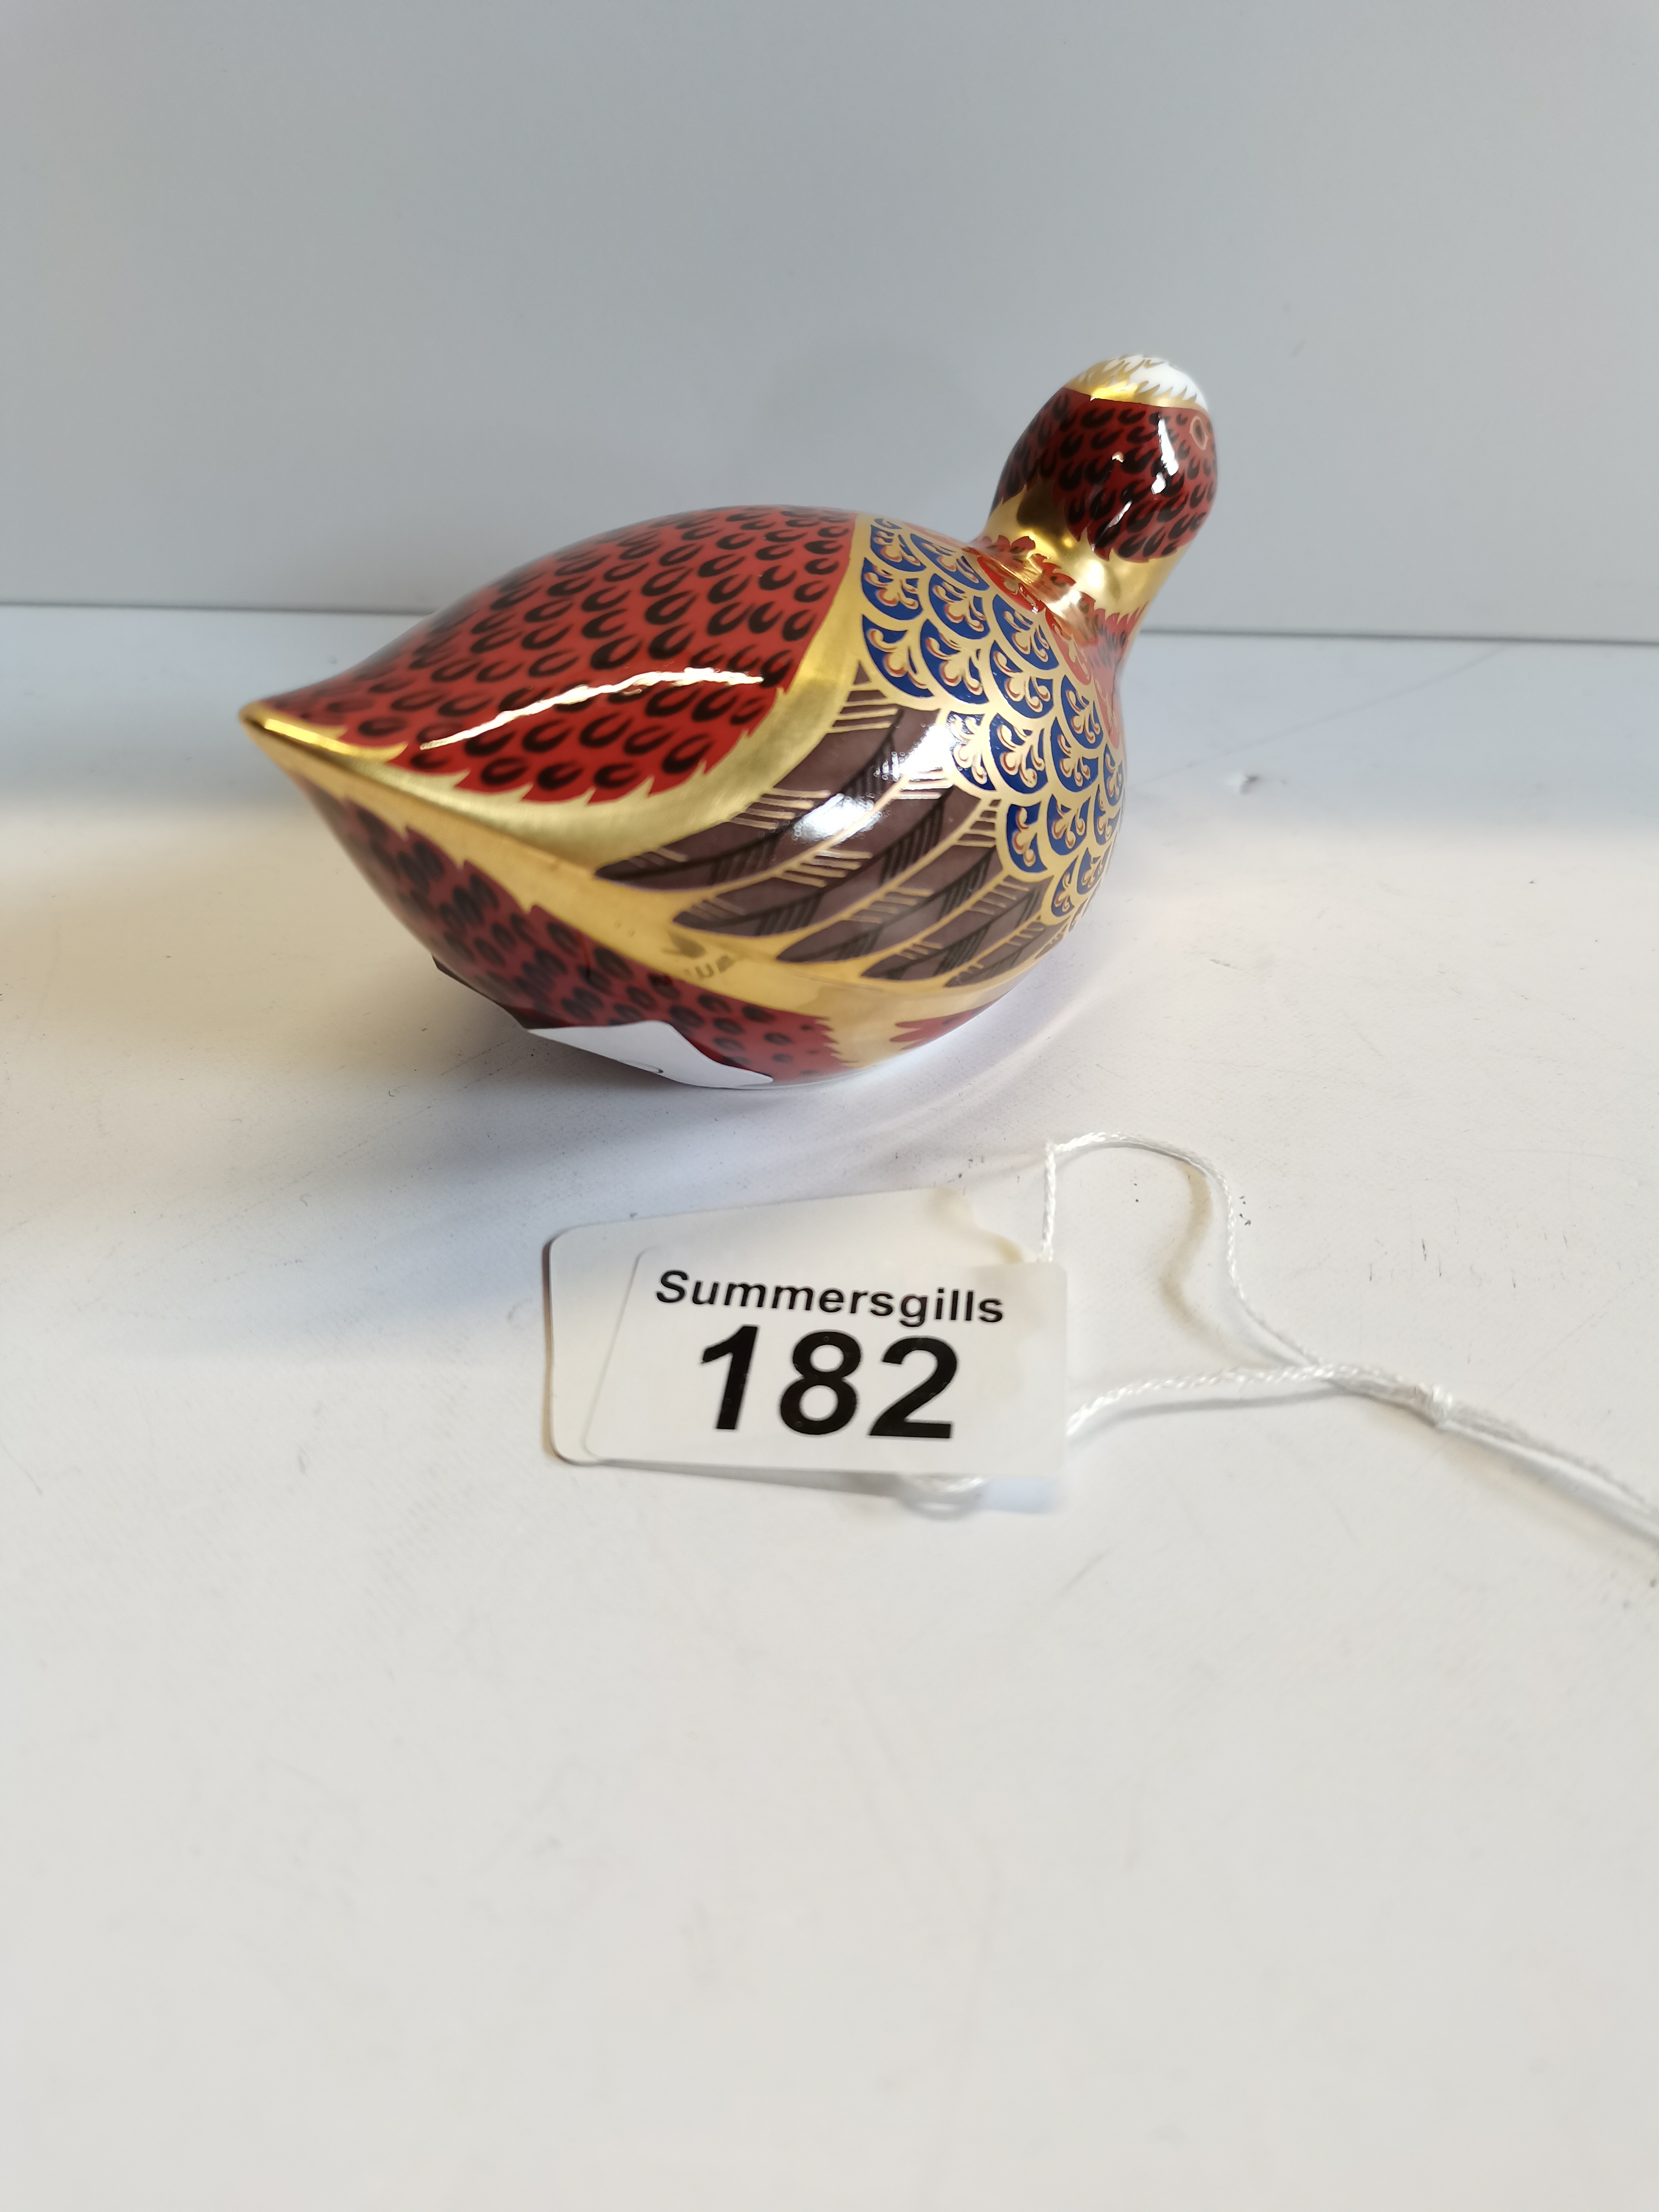 Crown Derby Coot - Image 2 of 3